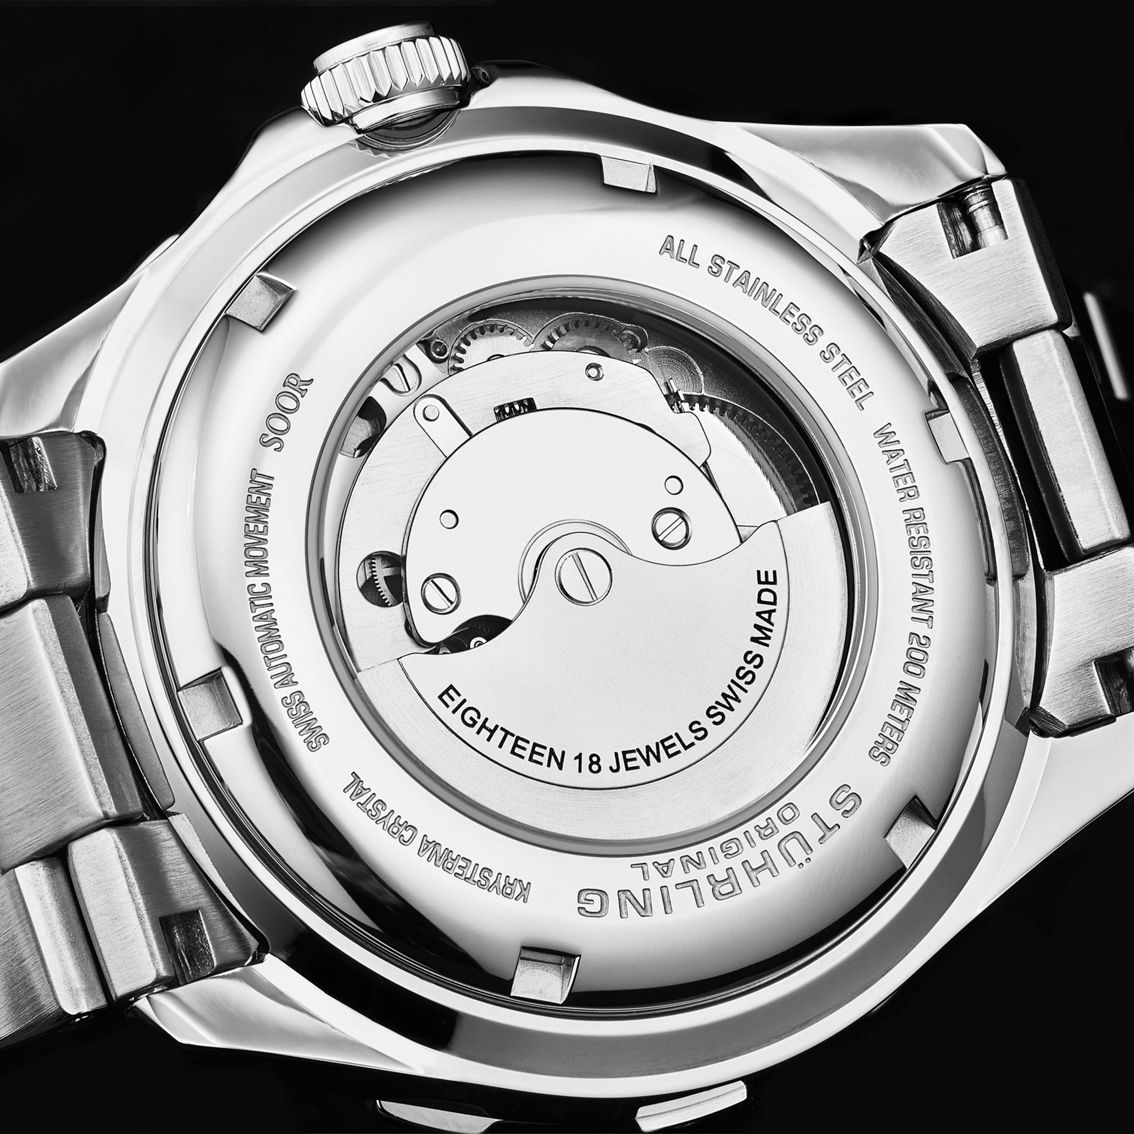 Stührling Original Swiss Automatic Astral 1005 45mm Watch - Image 3 of 5